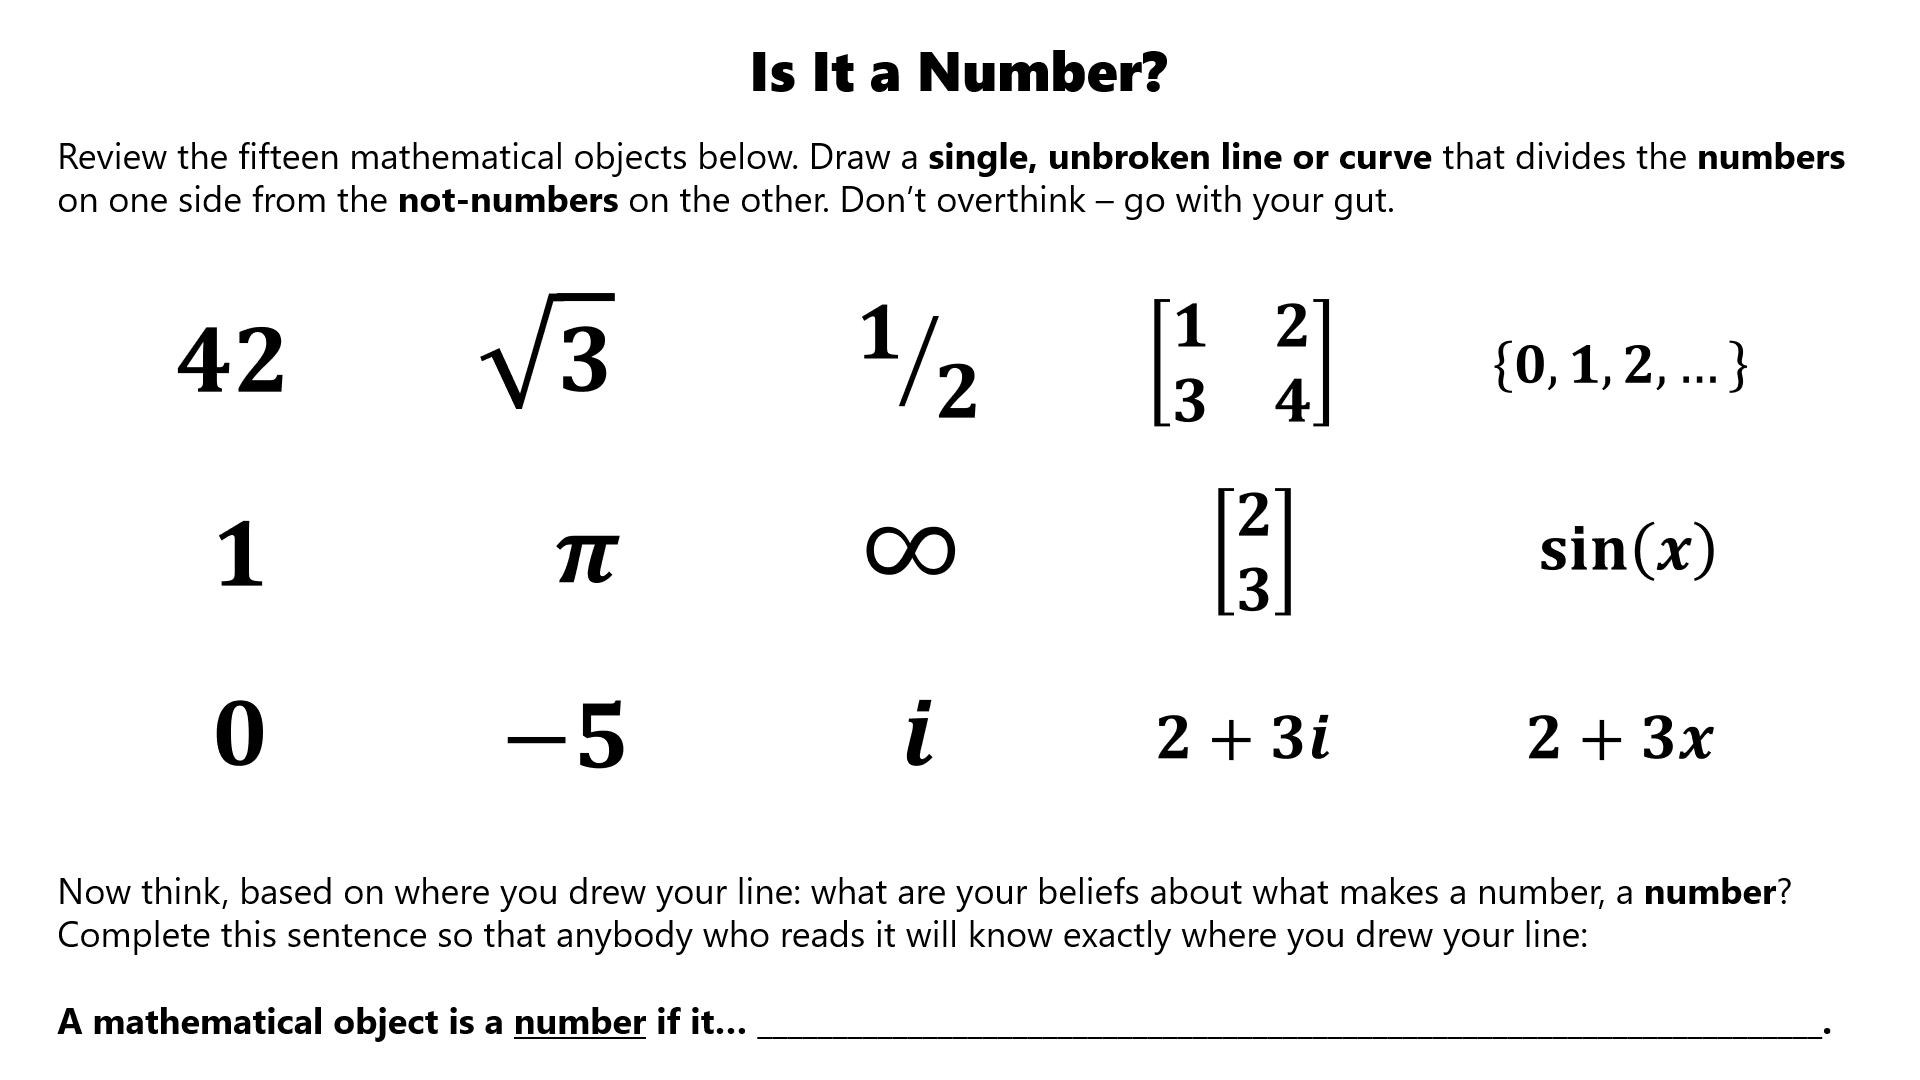 Is it a number?